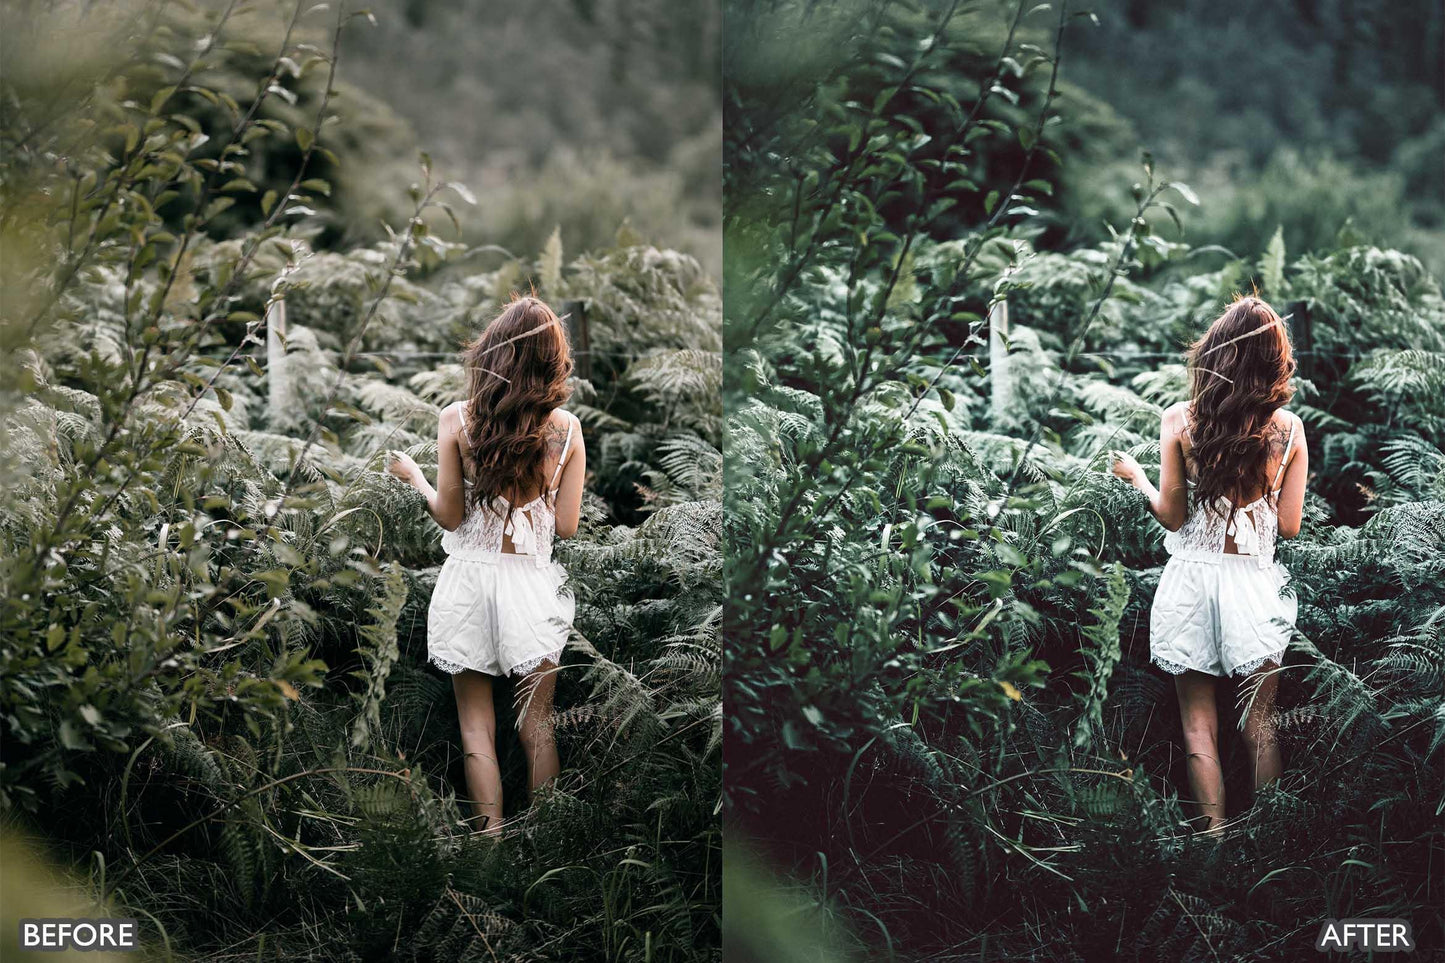 Dark and Moody Lightroom Presets - adobe lightroom presets, black presets, brown presets, Cinematic Presets, instagram presets, lightroom presets, Portrait presets, presets before and after, professional lightroom presets - aaapresets.com